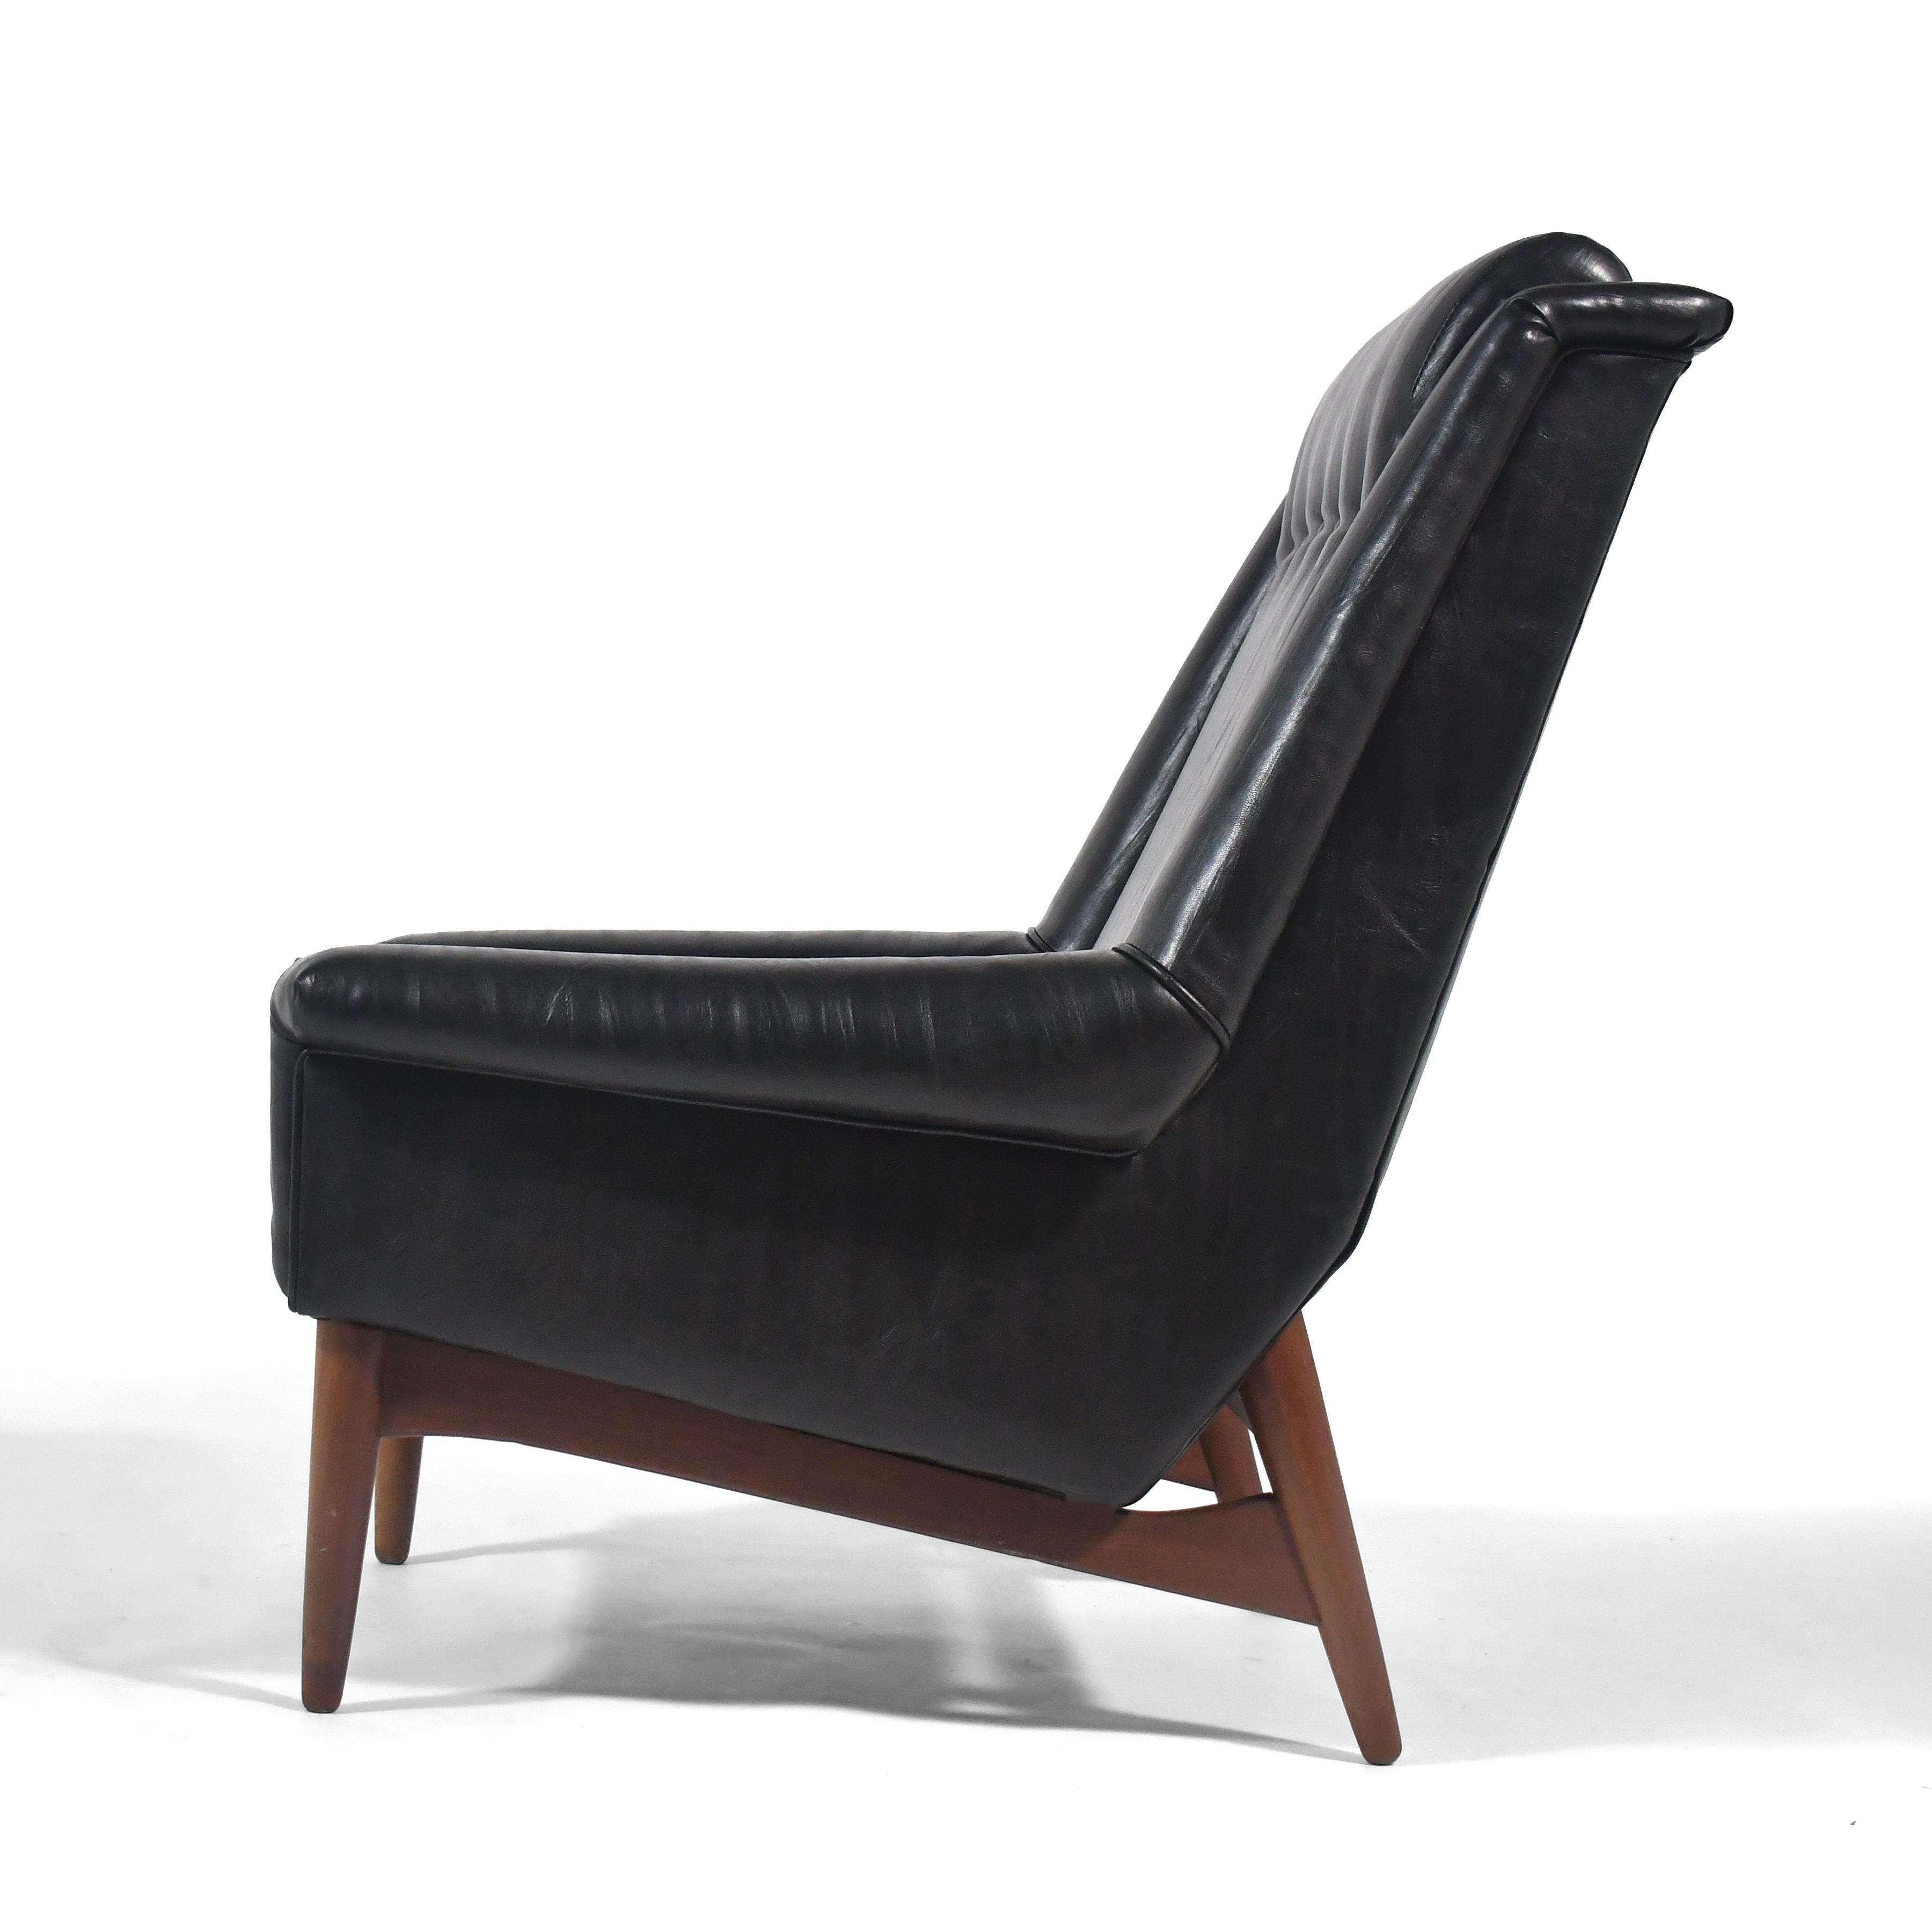 Swedish Folke Ohlsson Lounge Chair by DUX For Sale